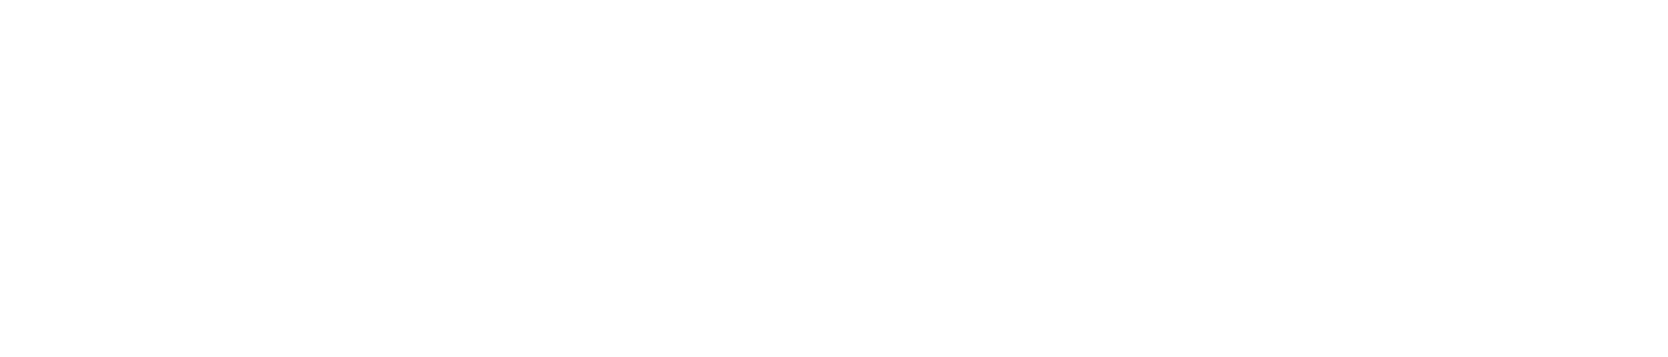 Healthy Business ConsultingLogo